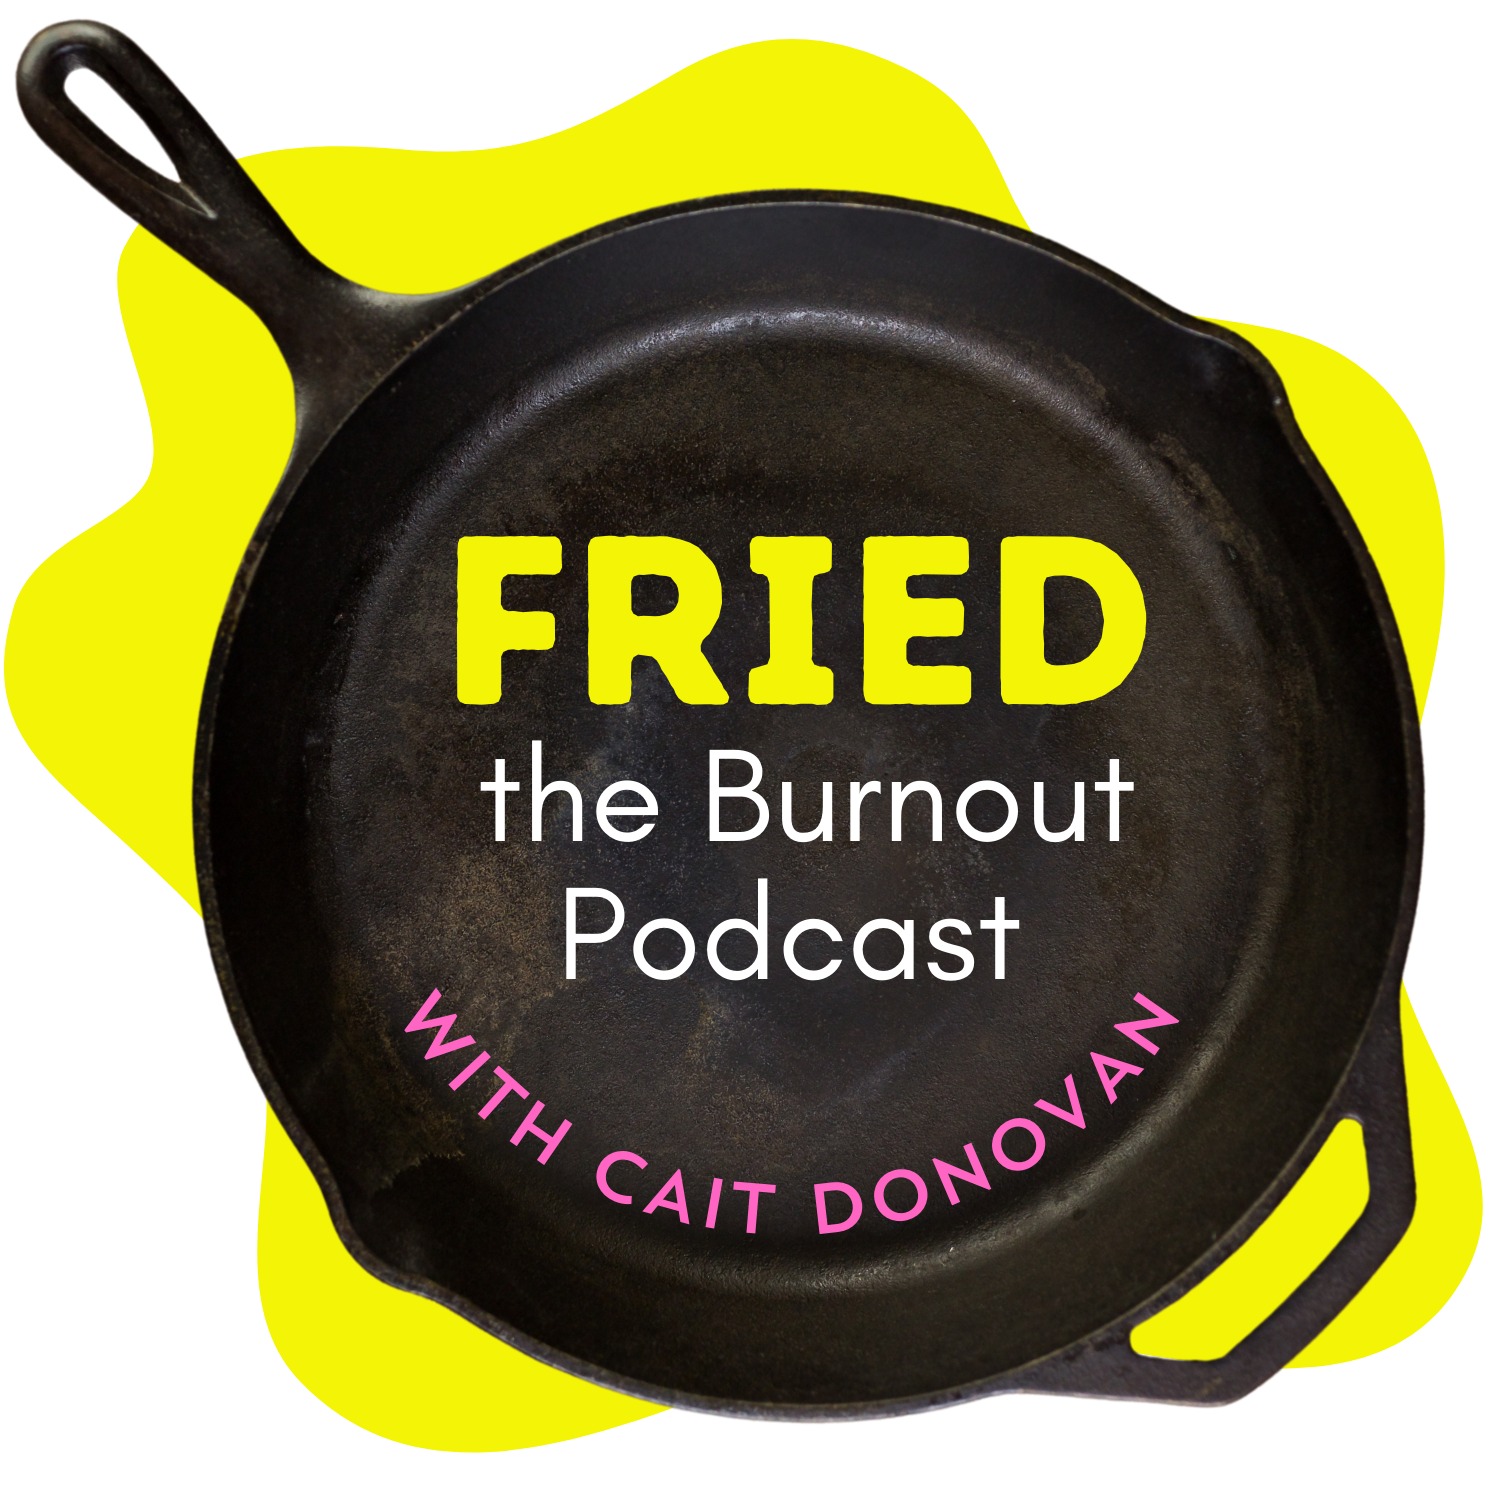 FRIED: The Burnout Podcast